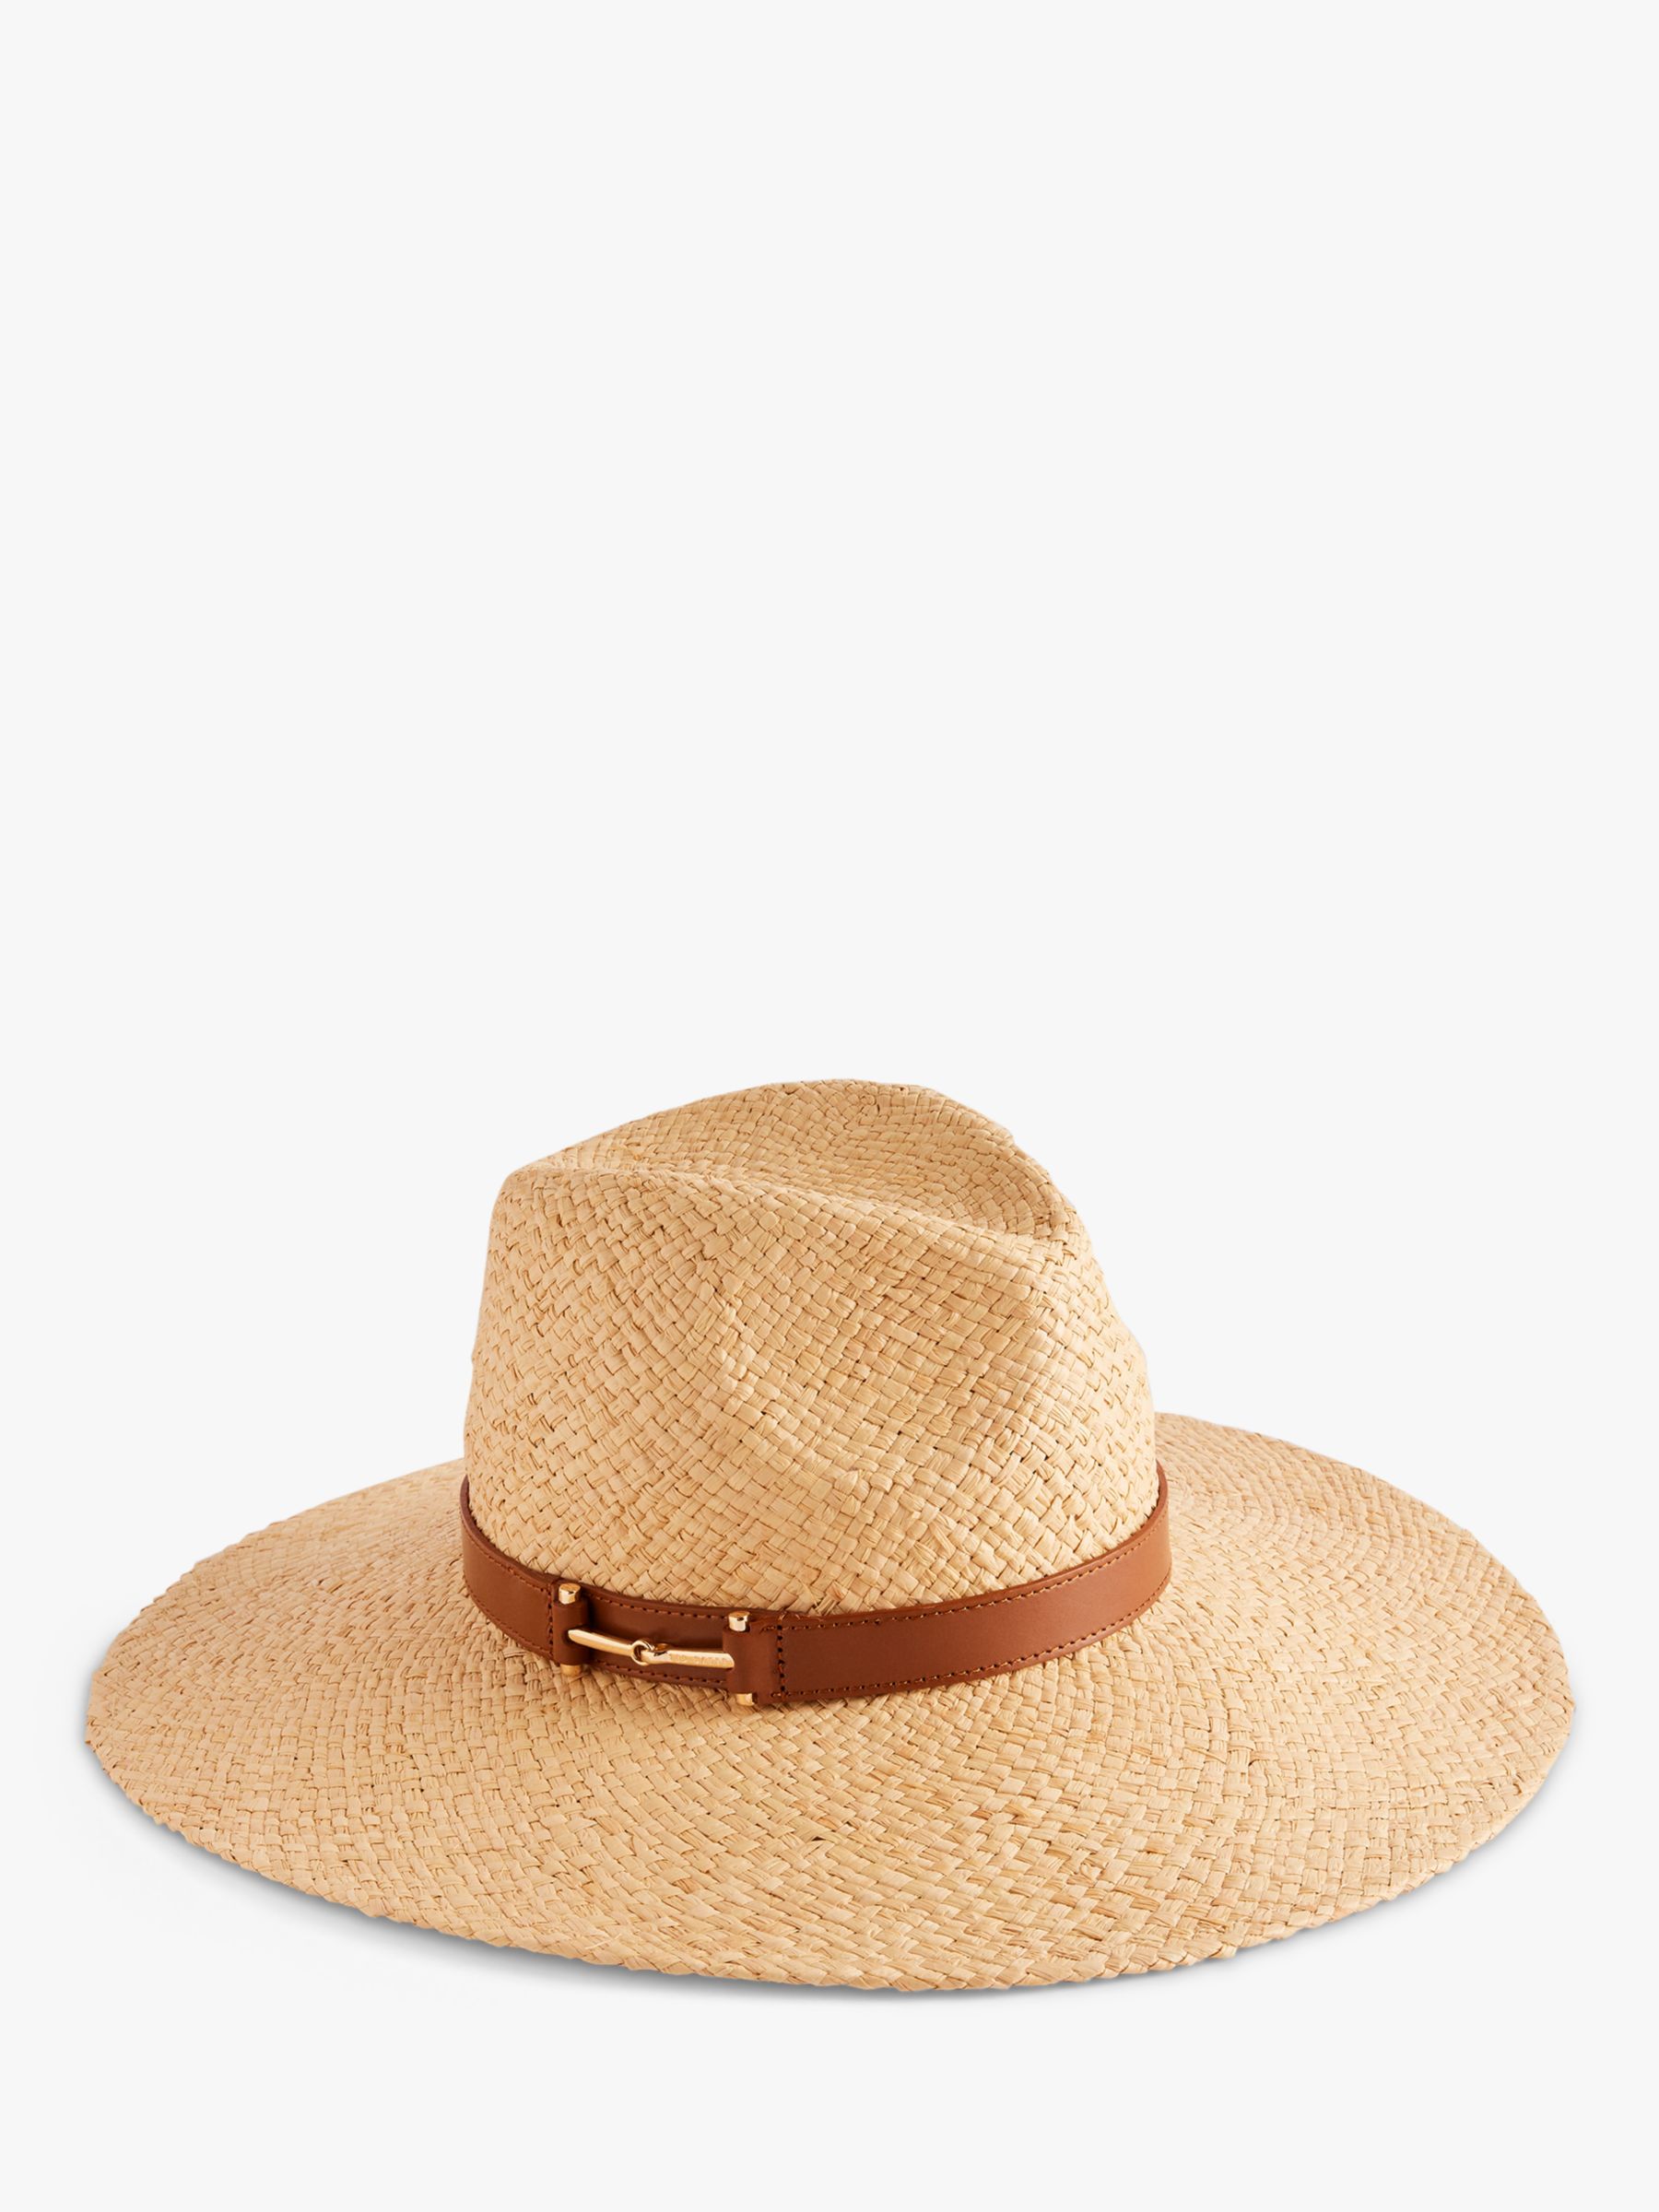 Ted Baker Hariets Straw Hat, Natural, One Size